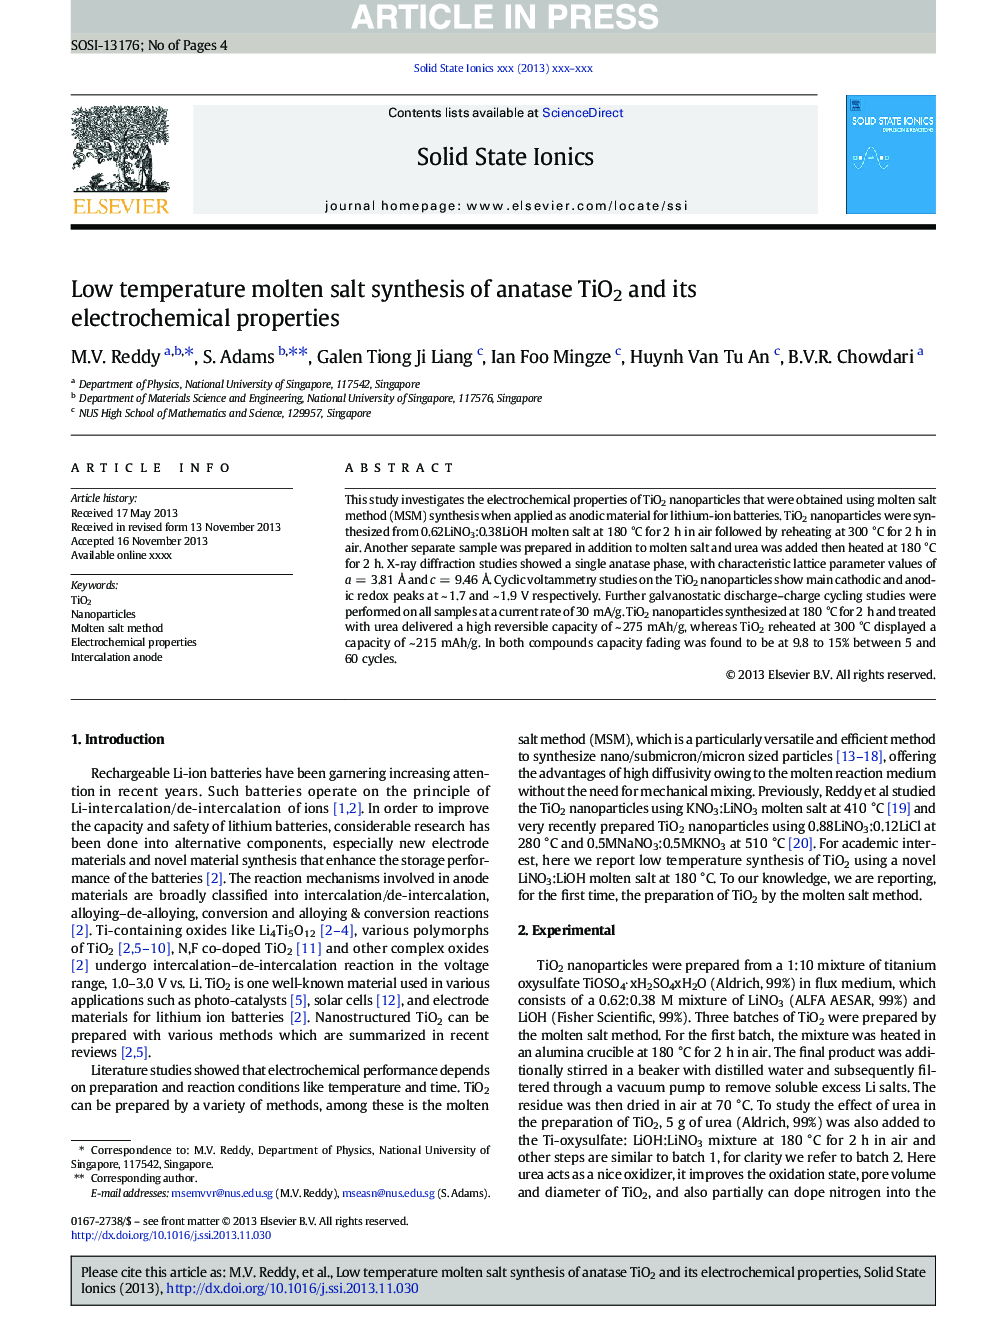 Low temperature molten salt synthesis of anatase TiO2 and its electrochemical properties